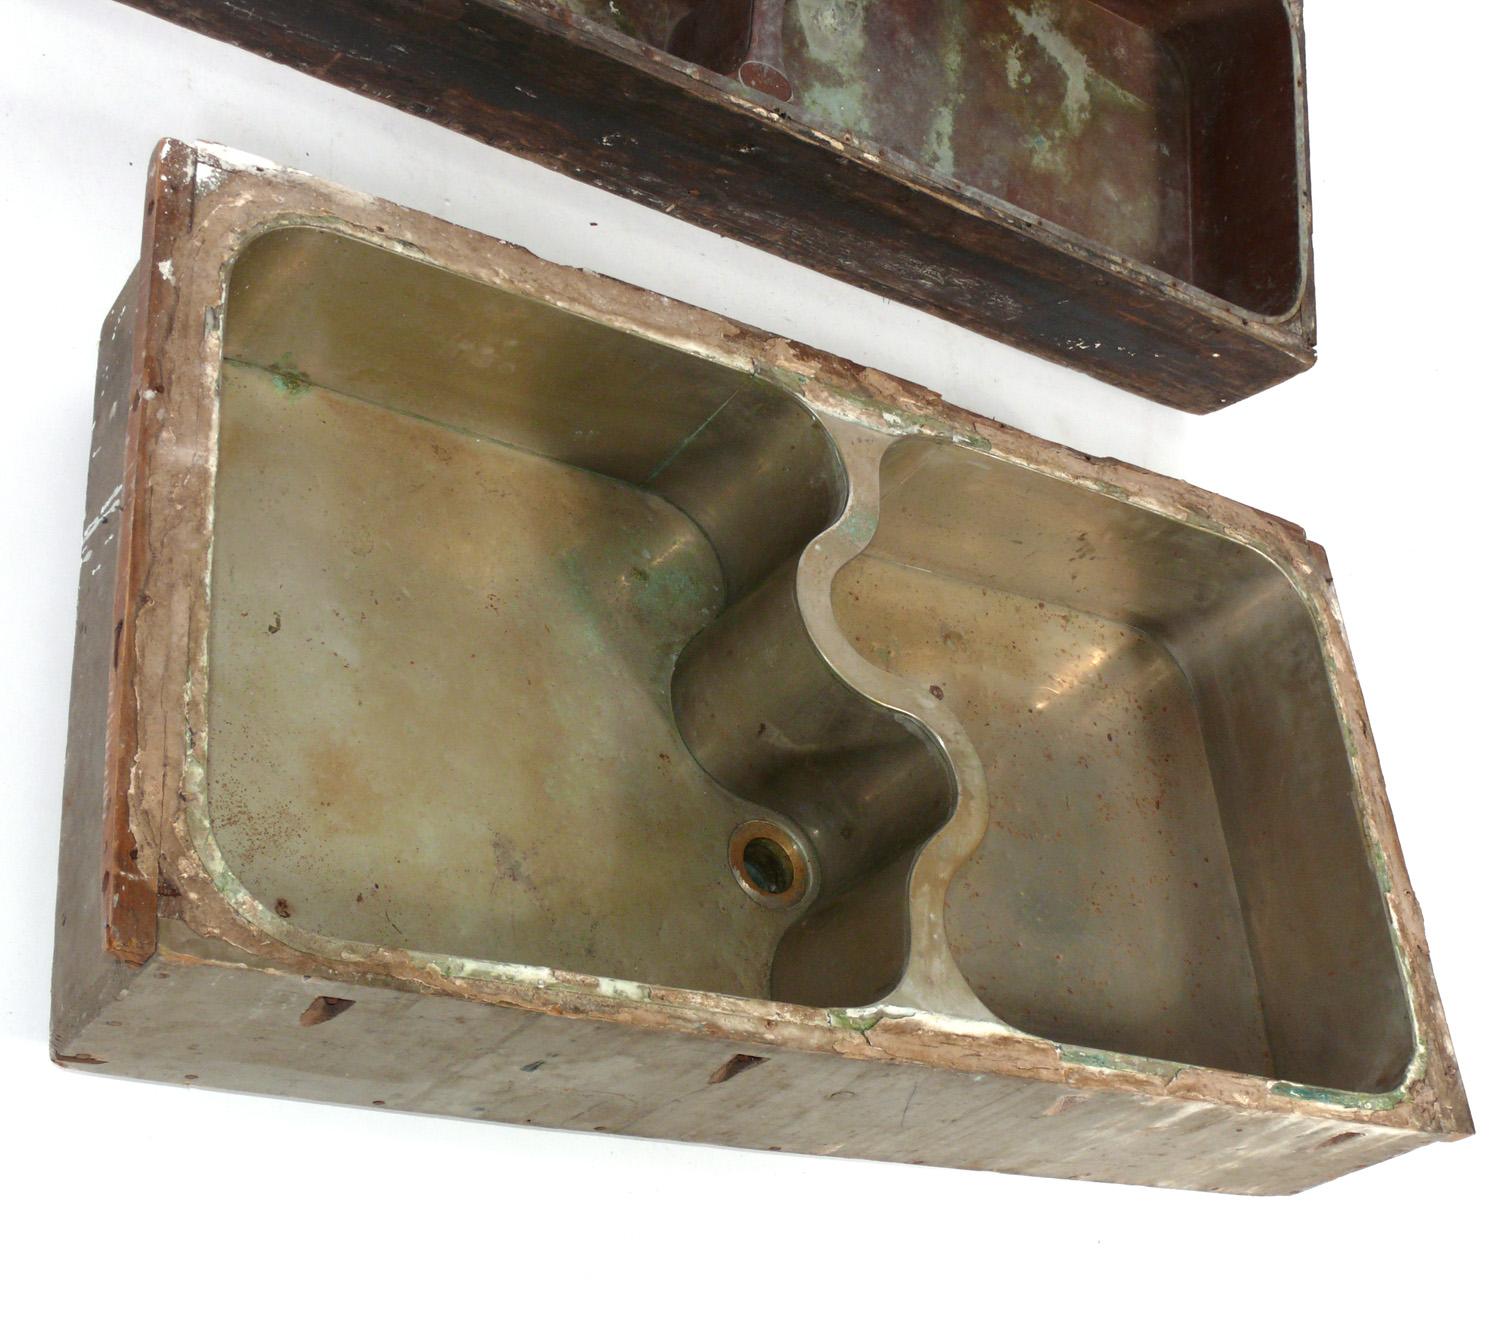 American Selection of 1930s Industrial Art Deco Sinks Attributed to Donald Deskey